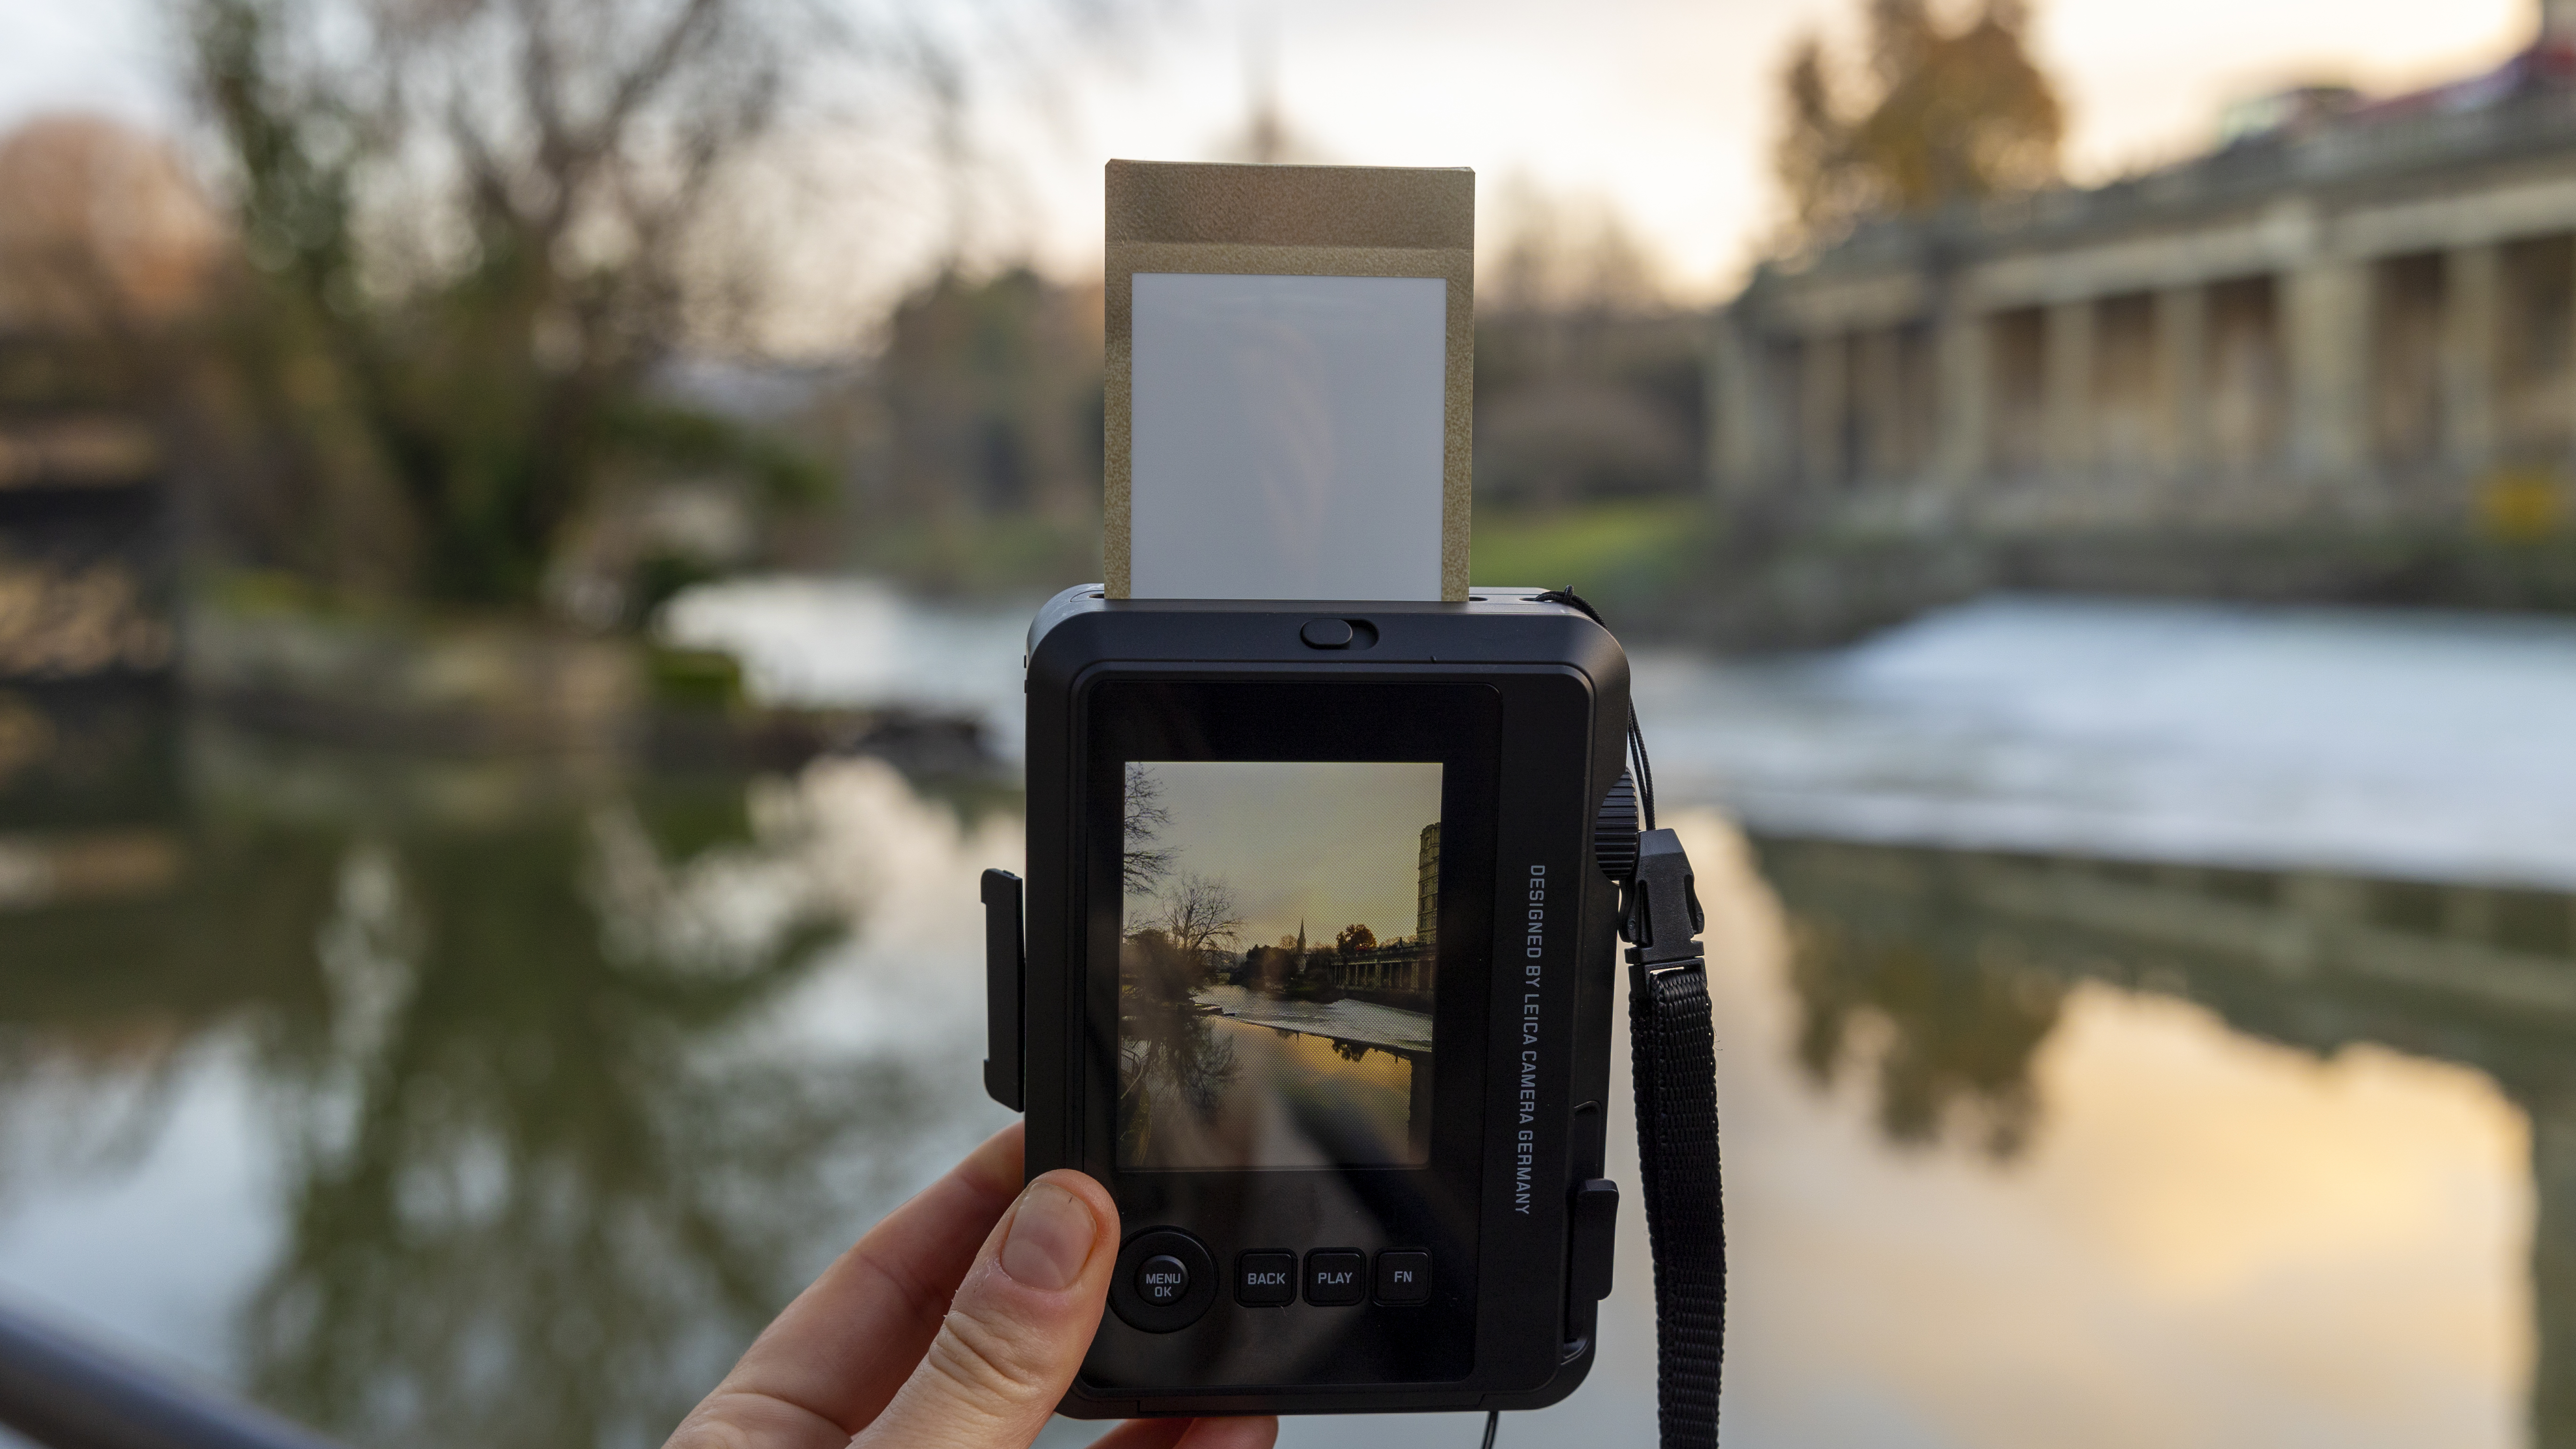 An Instax Mini print coming out of the Leica Sofort 2